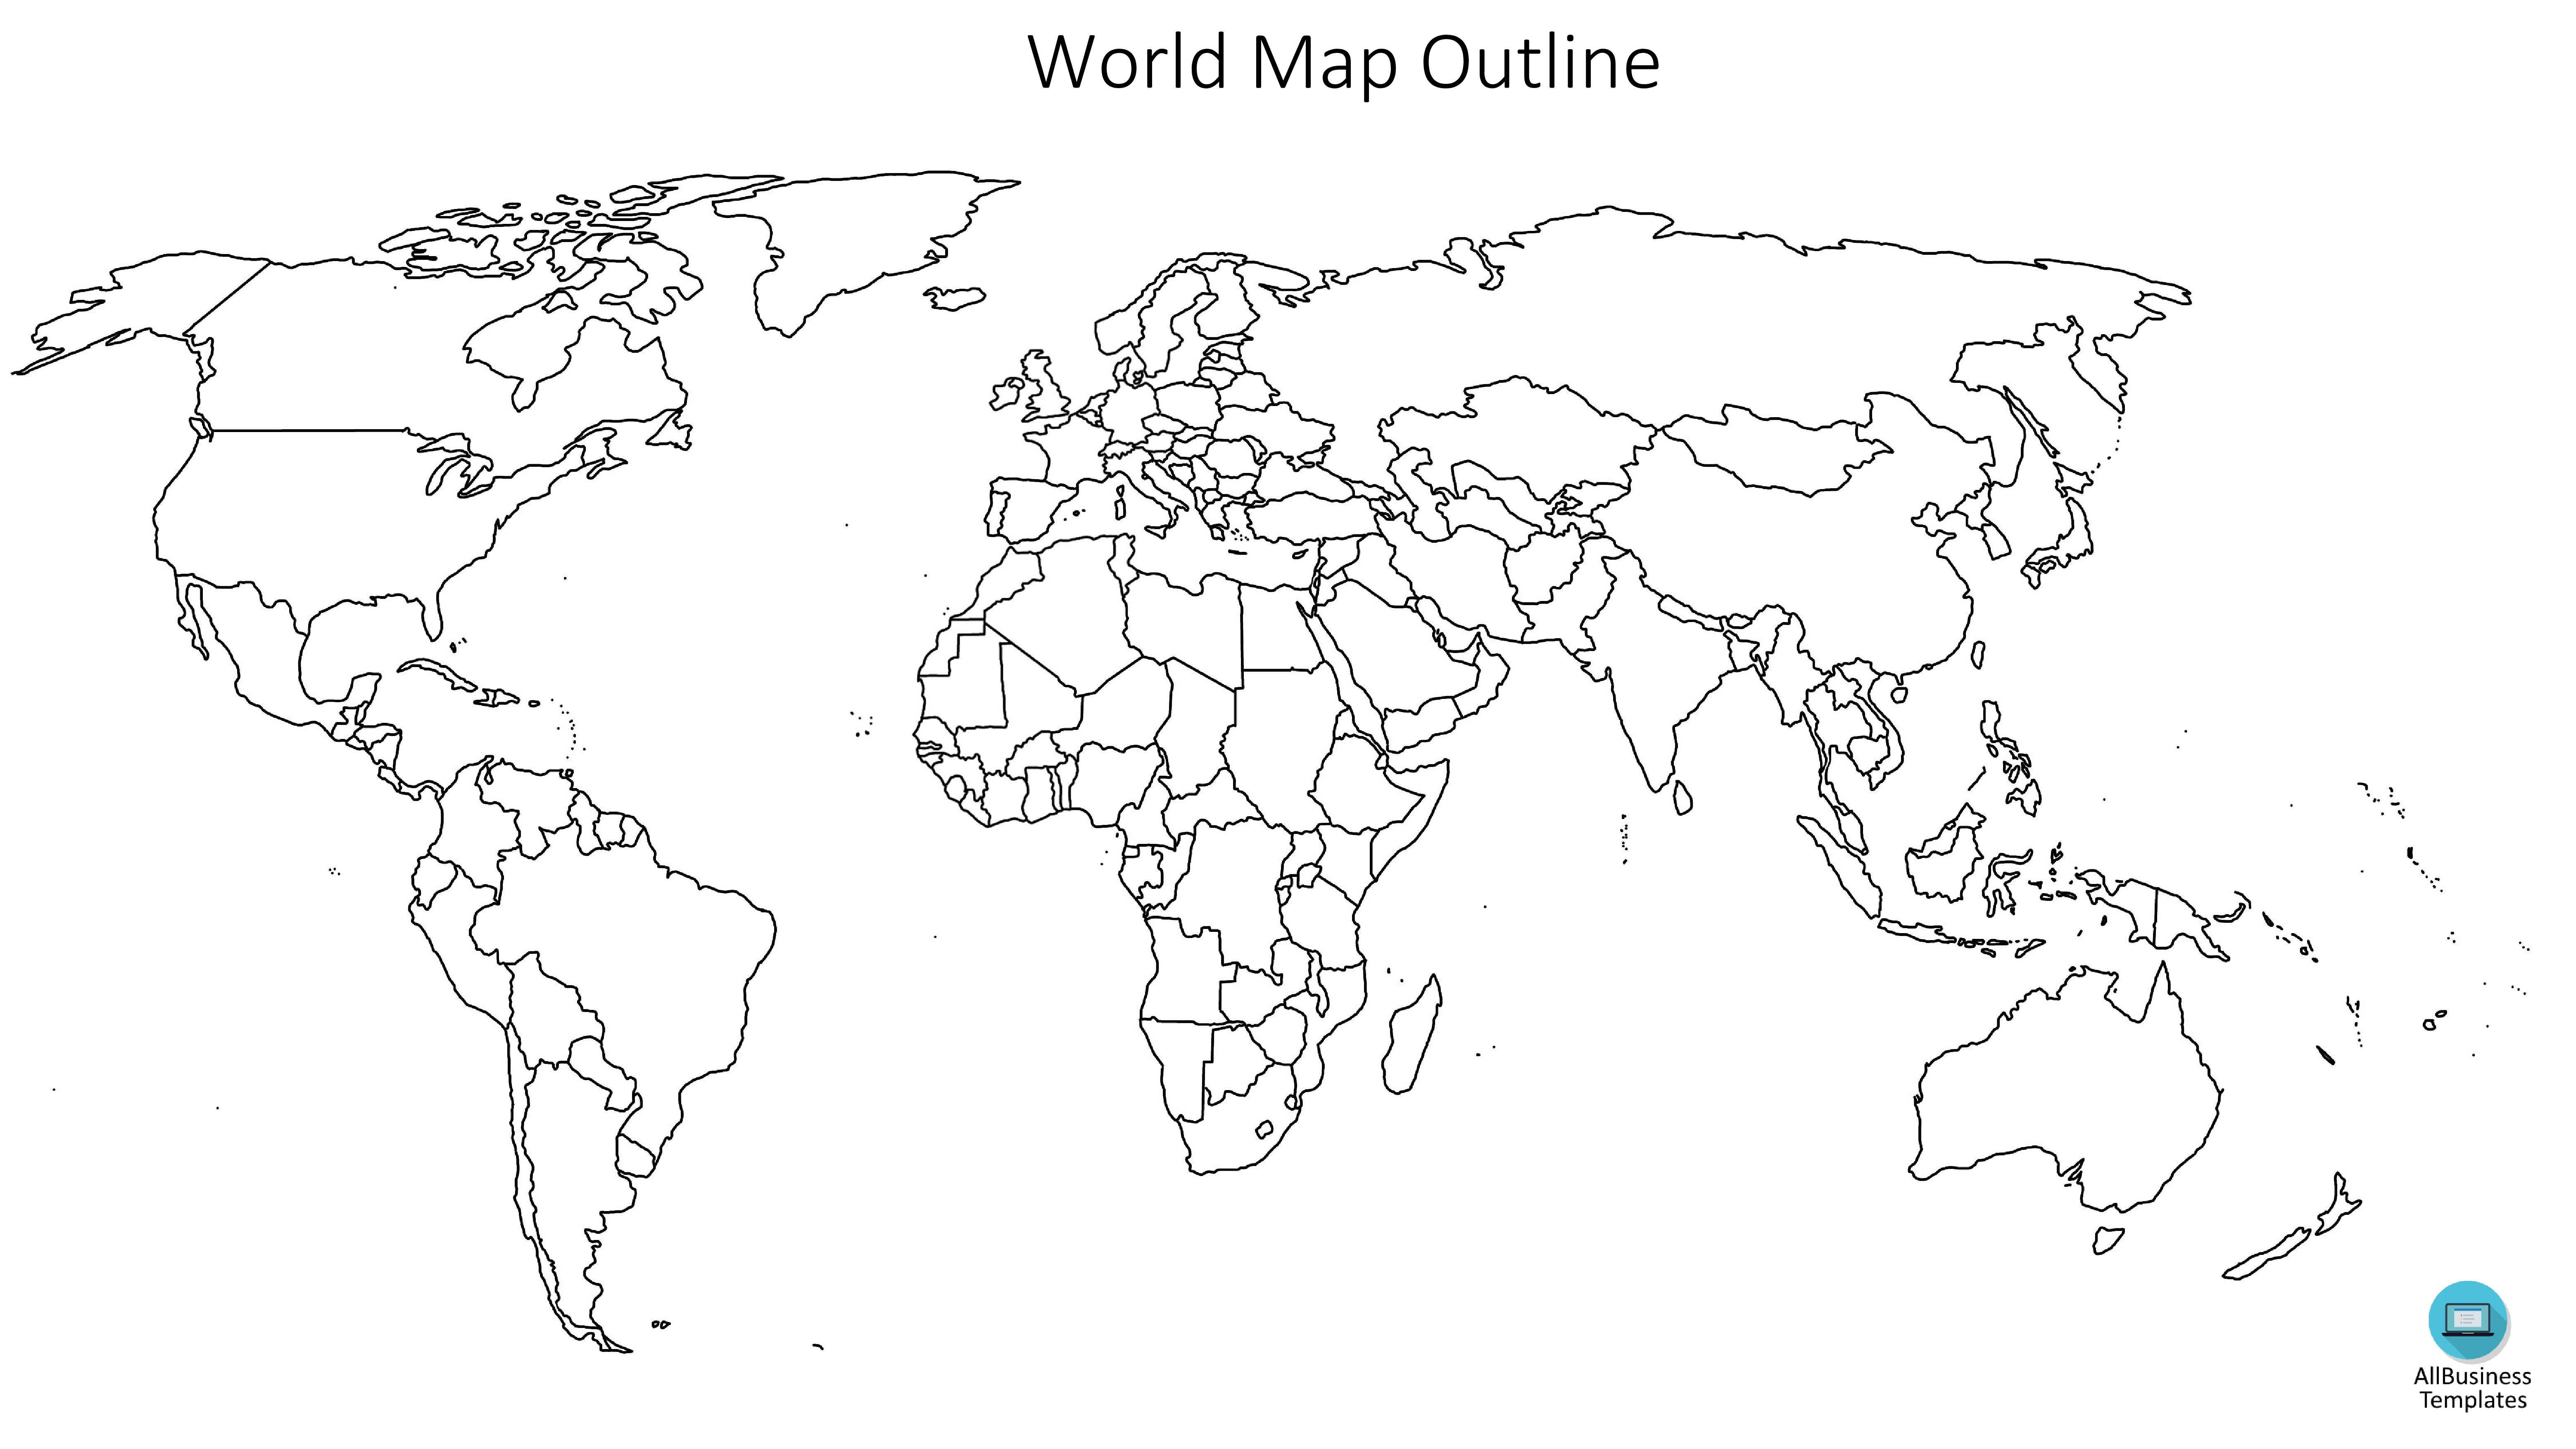 World Map Blank Template World Map Outline | Templates at allbusinesstemplates.com